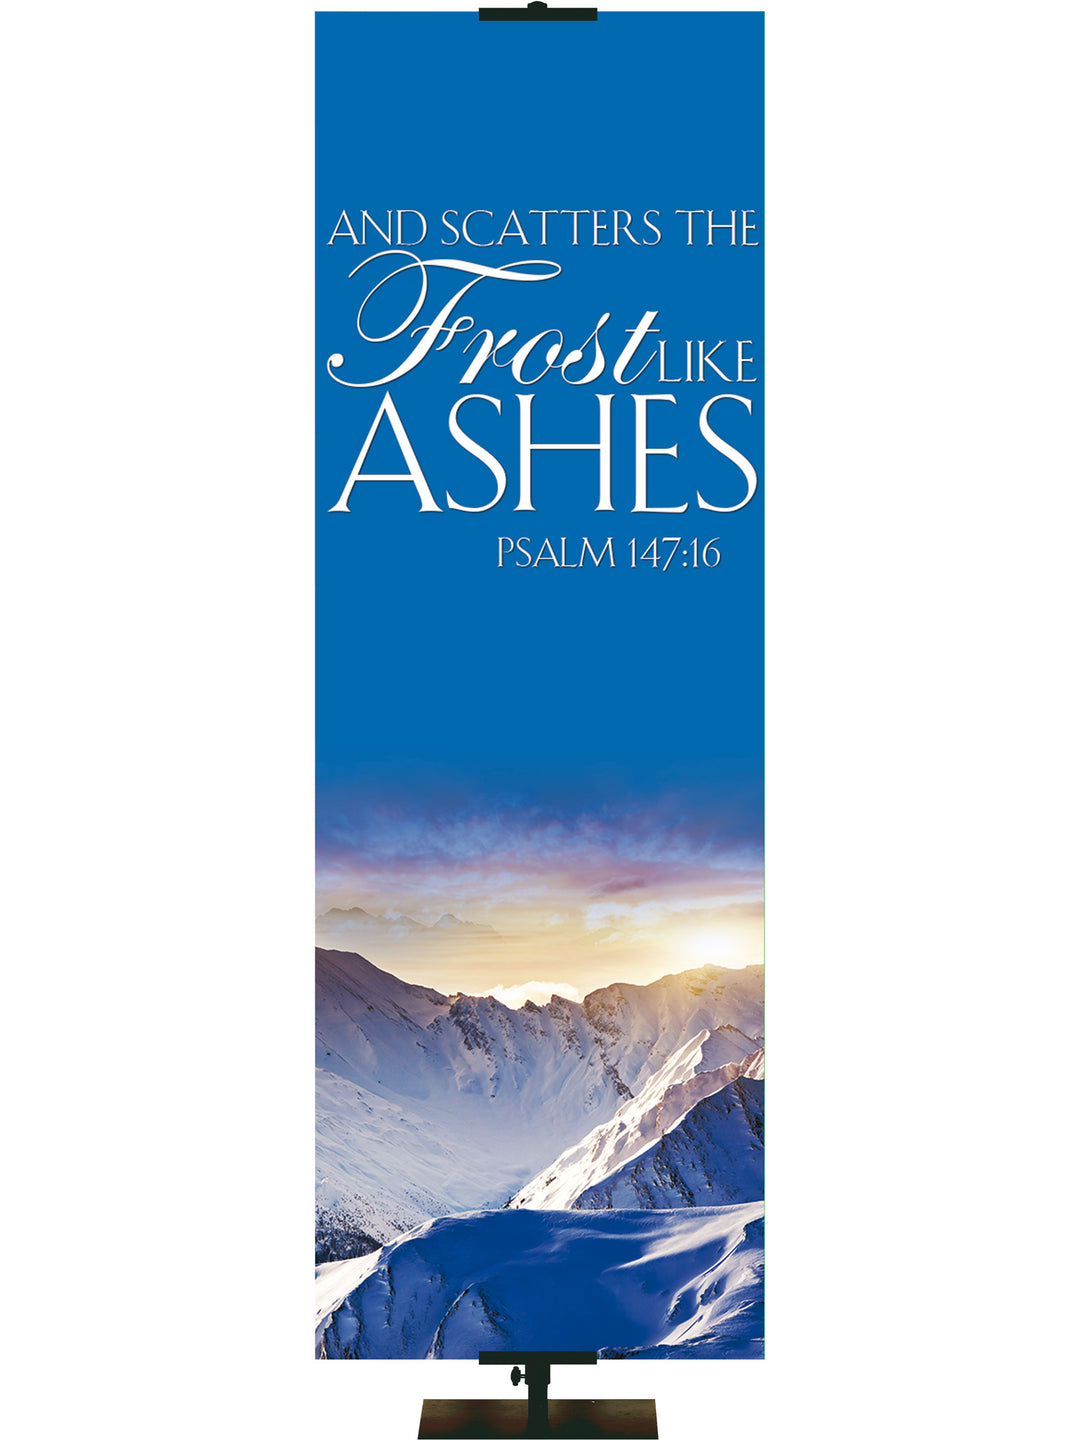 Portraits of Sacred Winter Frost like Ashes C - Christmas Banners - PraiseBanners